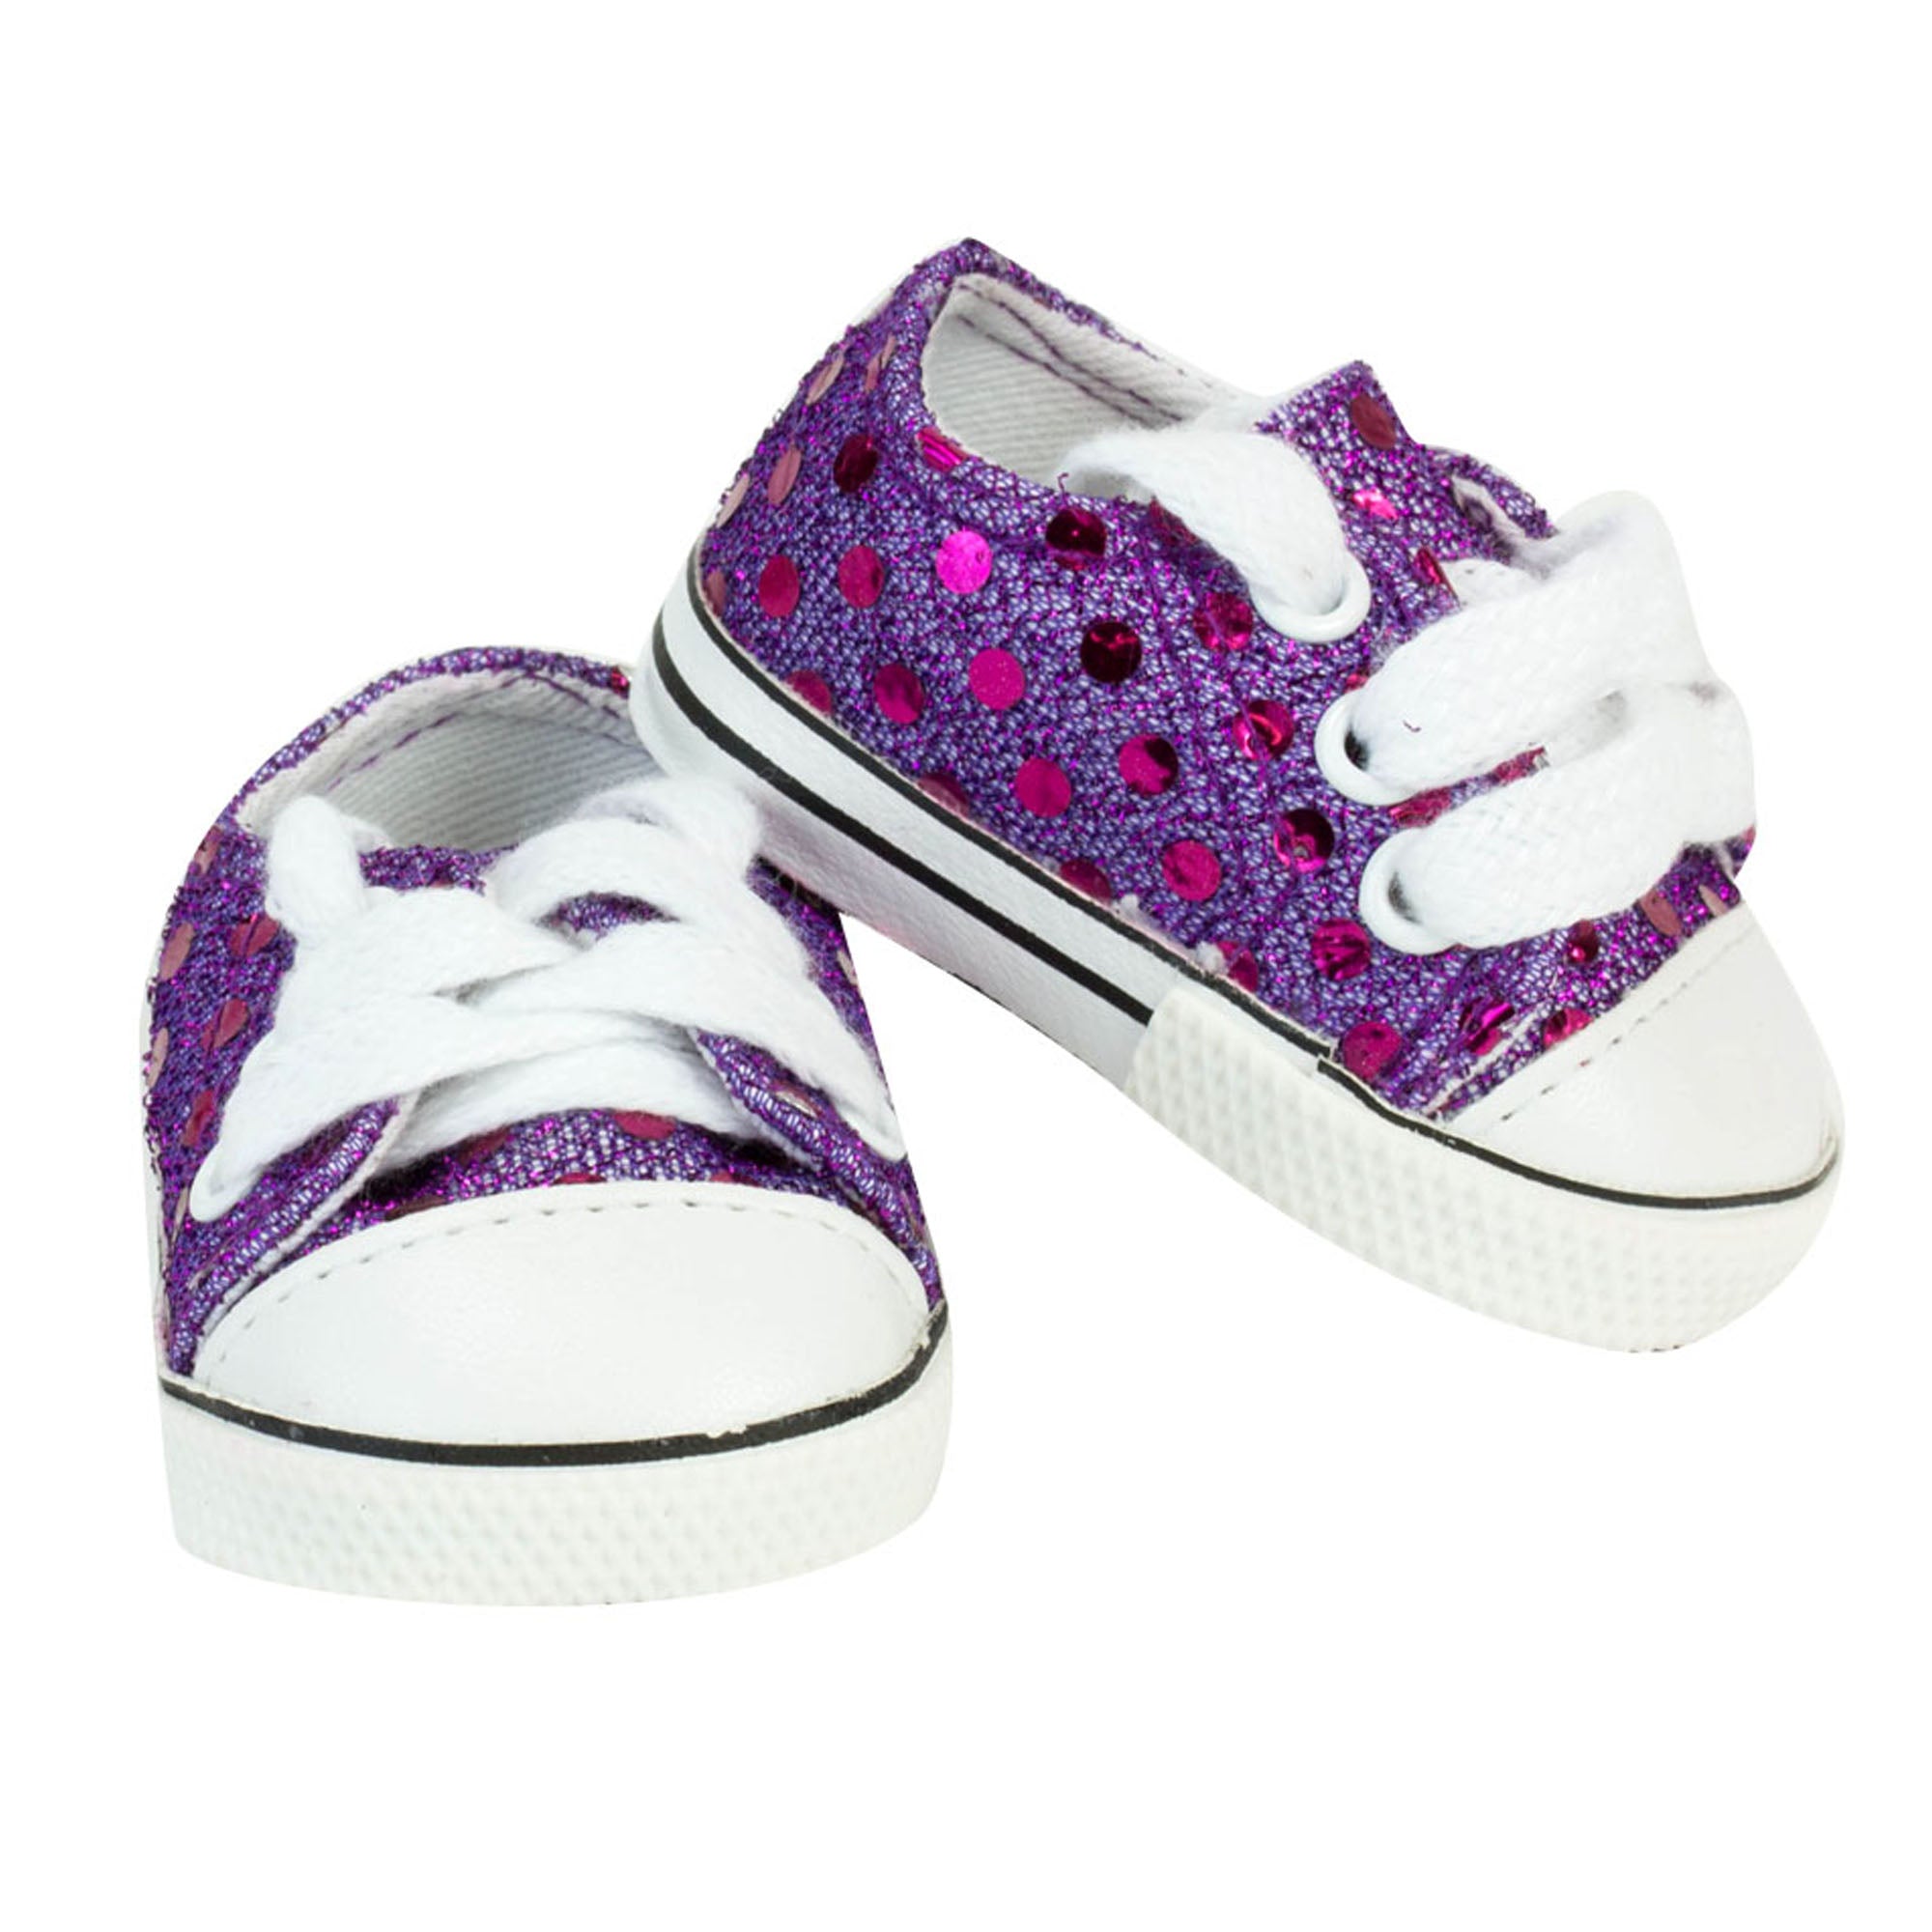 Sophia’s Cute Low-Top Canvas Sneakers with Allover Sparkly Purple Sequins & Classic Exposed Seams for 18” Dolls, Purple